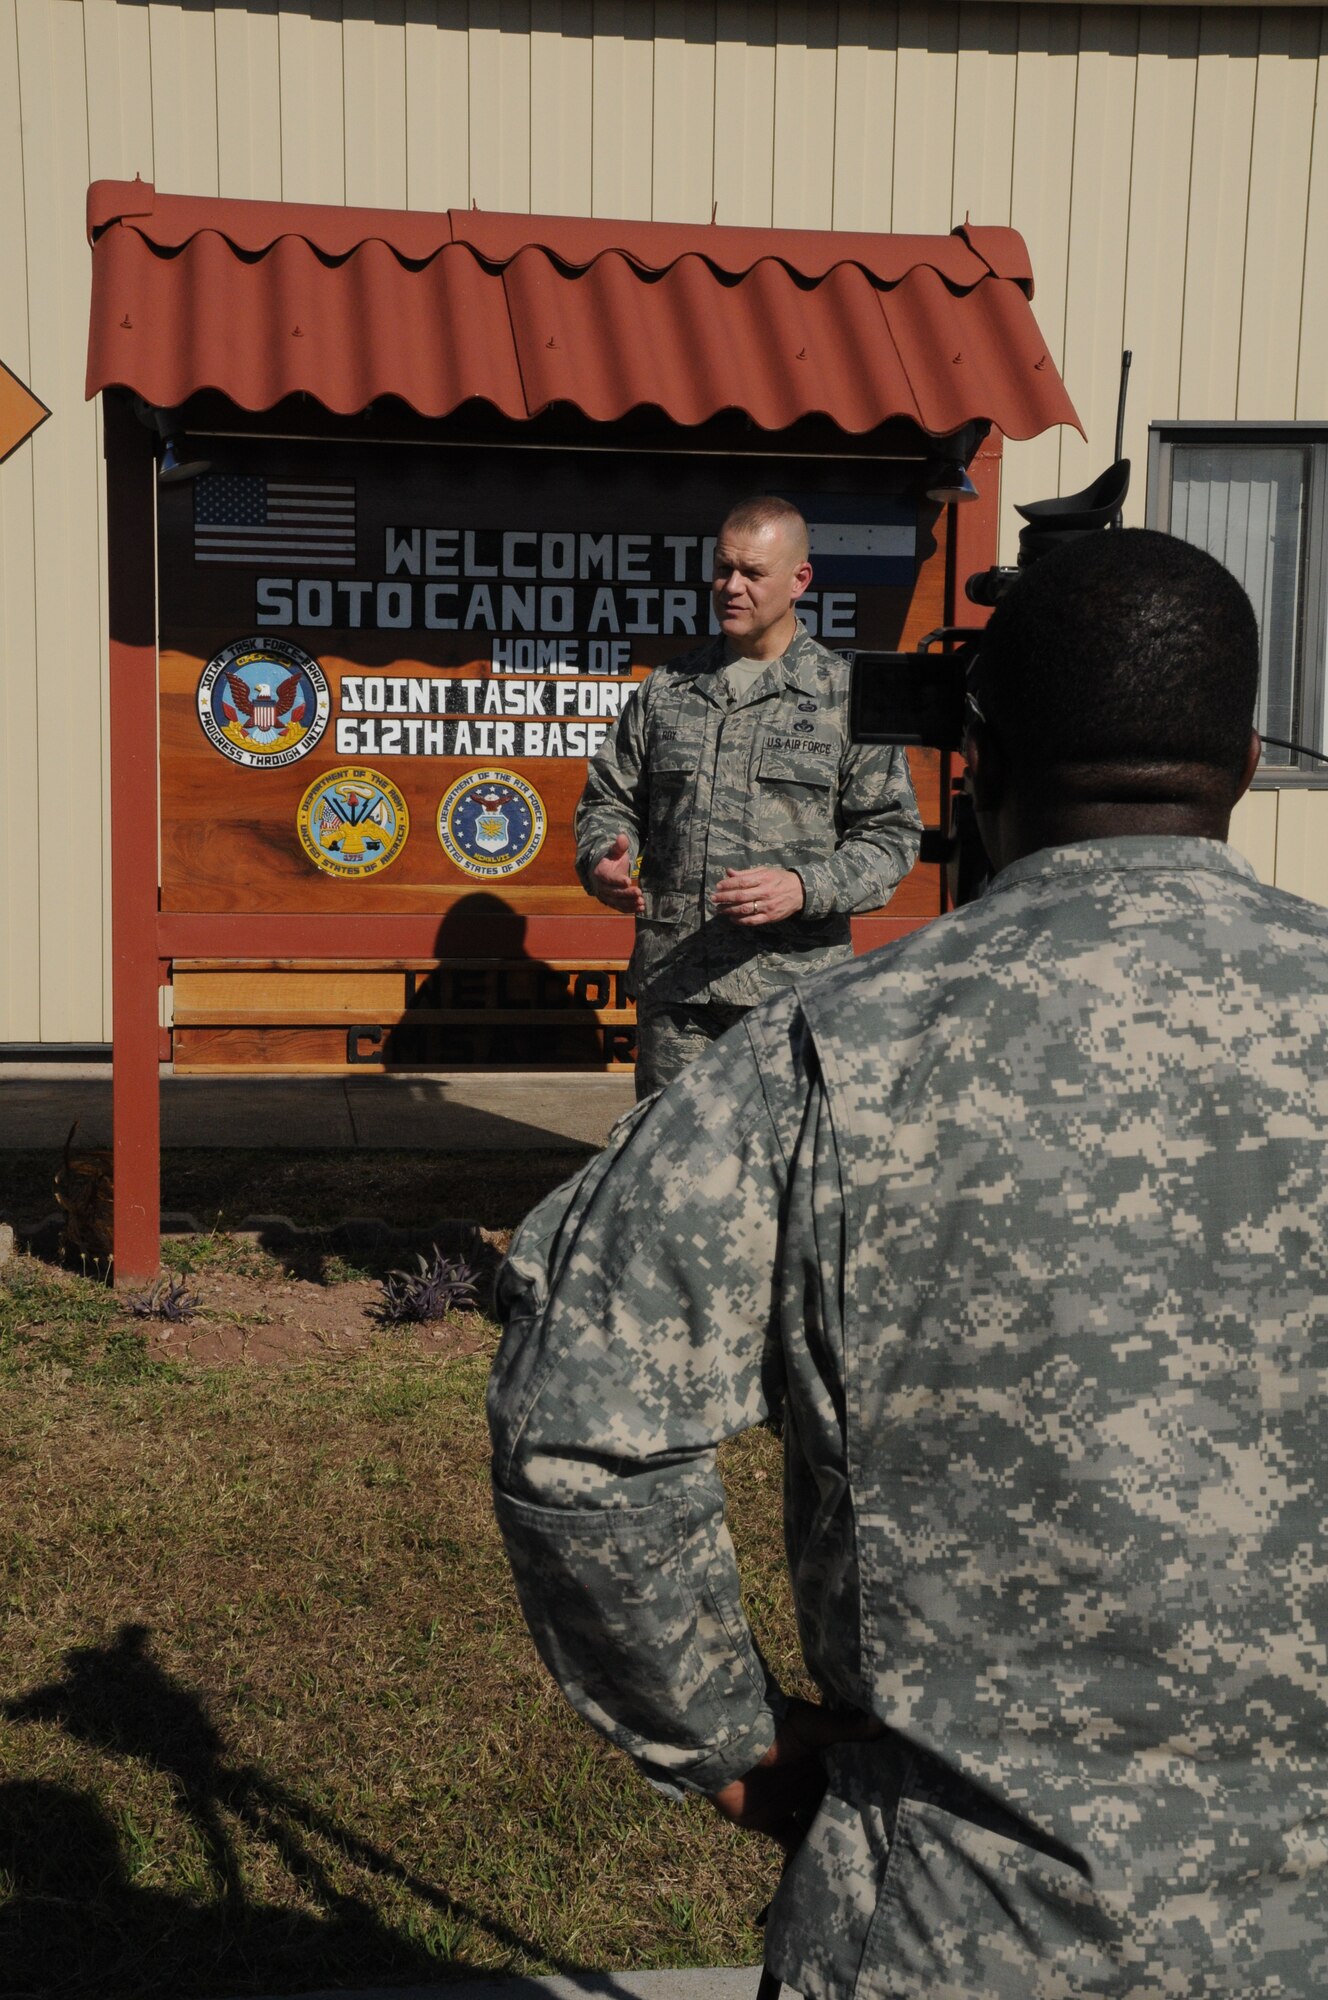 SOTO CANO AIR BASE, Honduras -- Chief Master Sgt. of the Air Force James Roy is filmed by Specialist Michael Loggins, American Forces Network, during an interview outside Base Operations here, Jan. 31. The chief visited Soto Cano and toured many facilities, conducted meet-and-greets and spoke with Airmen about key focuses in the Air Force today. (U.S. Air Force photo/Staff Sgt. Kimberly Rae Moore)
